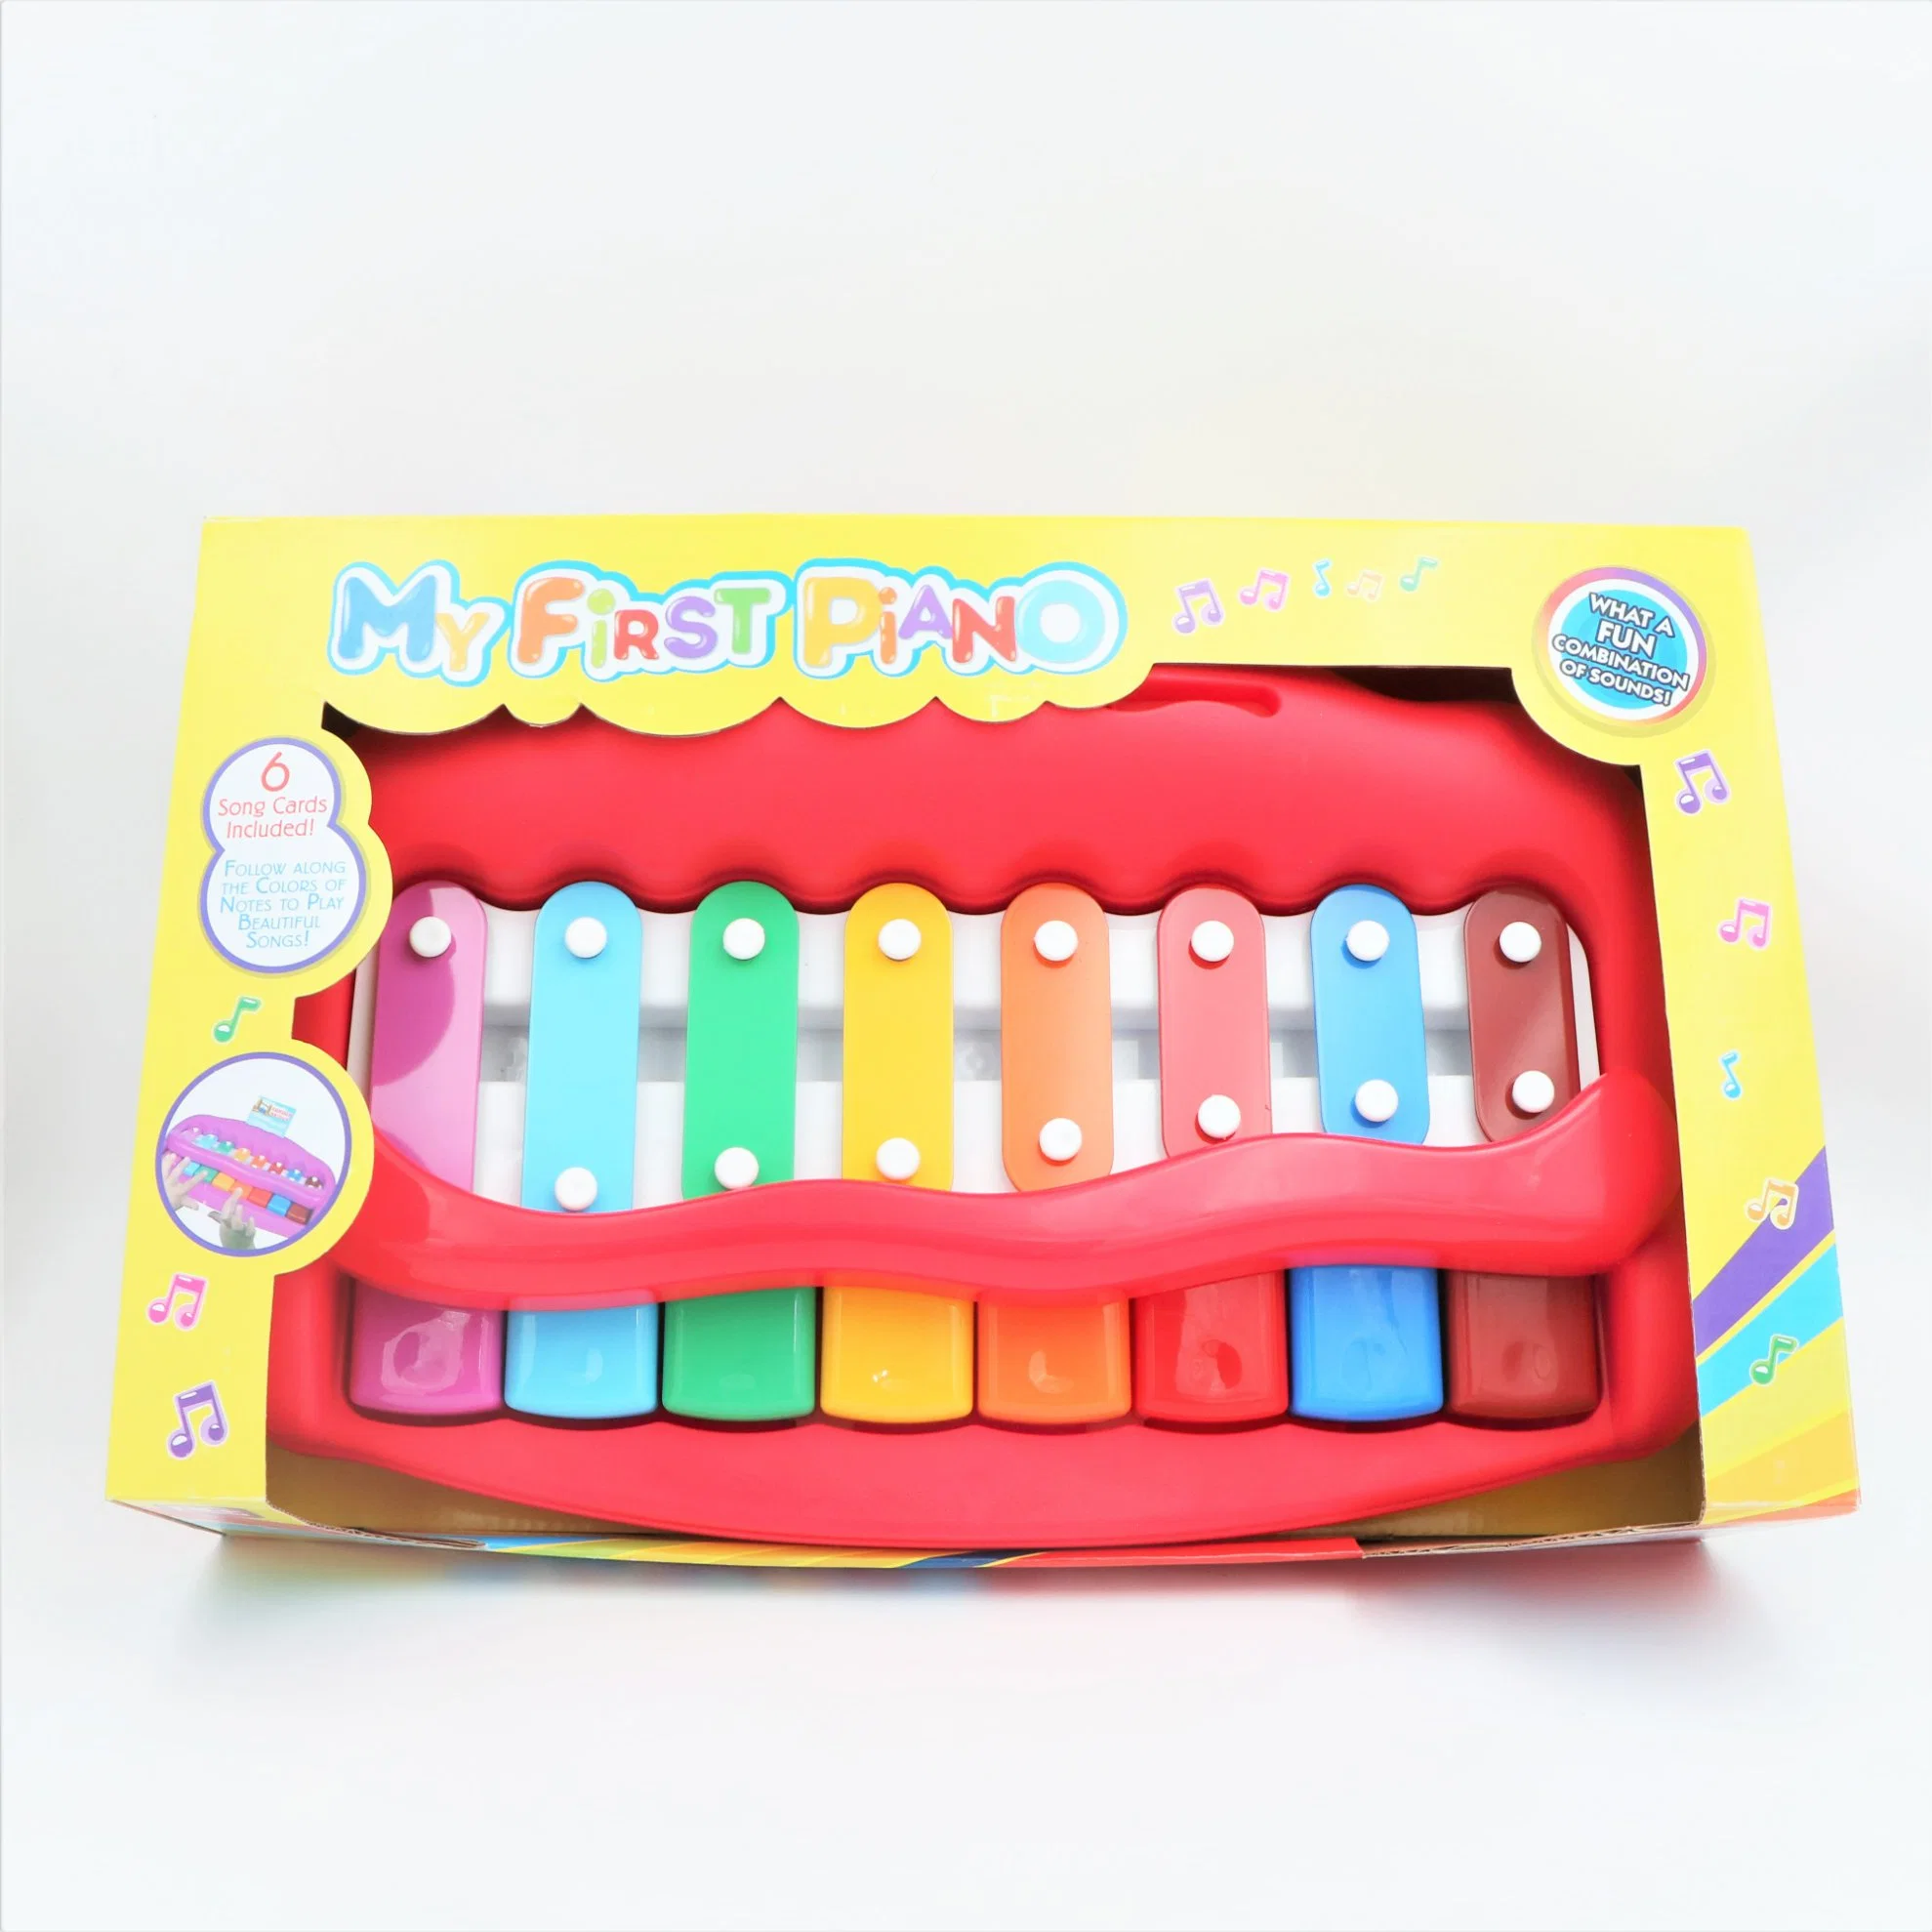 Multifunctional Xylophone Musical Piano Toy for Kids